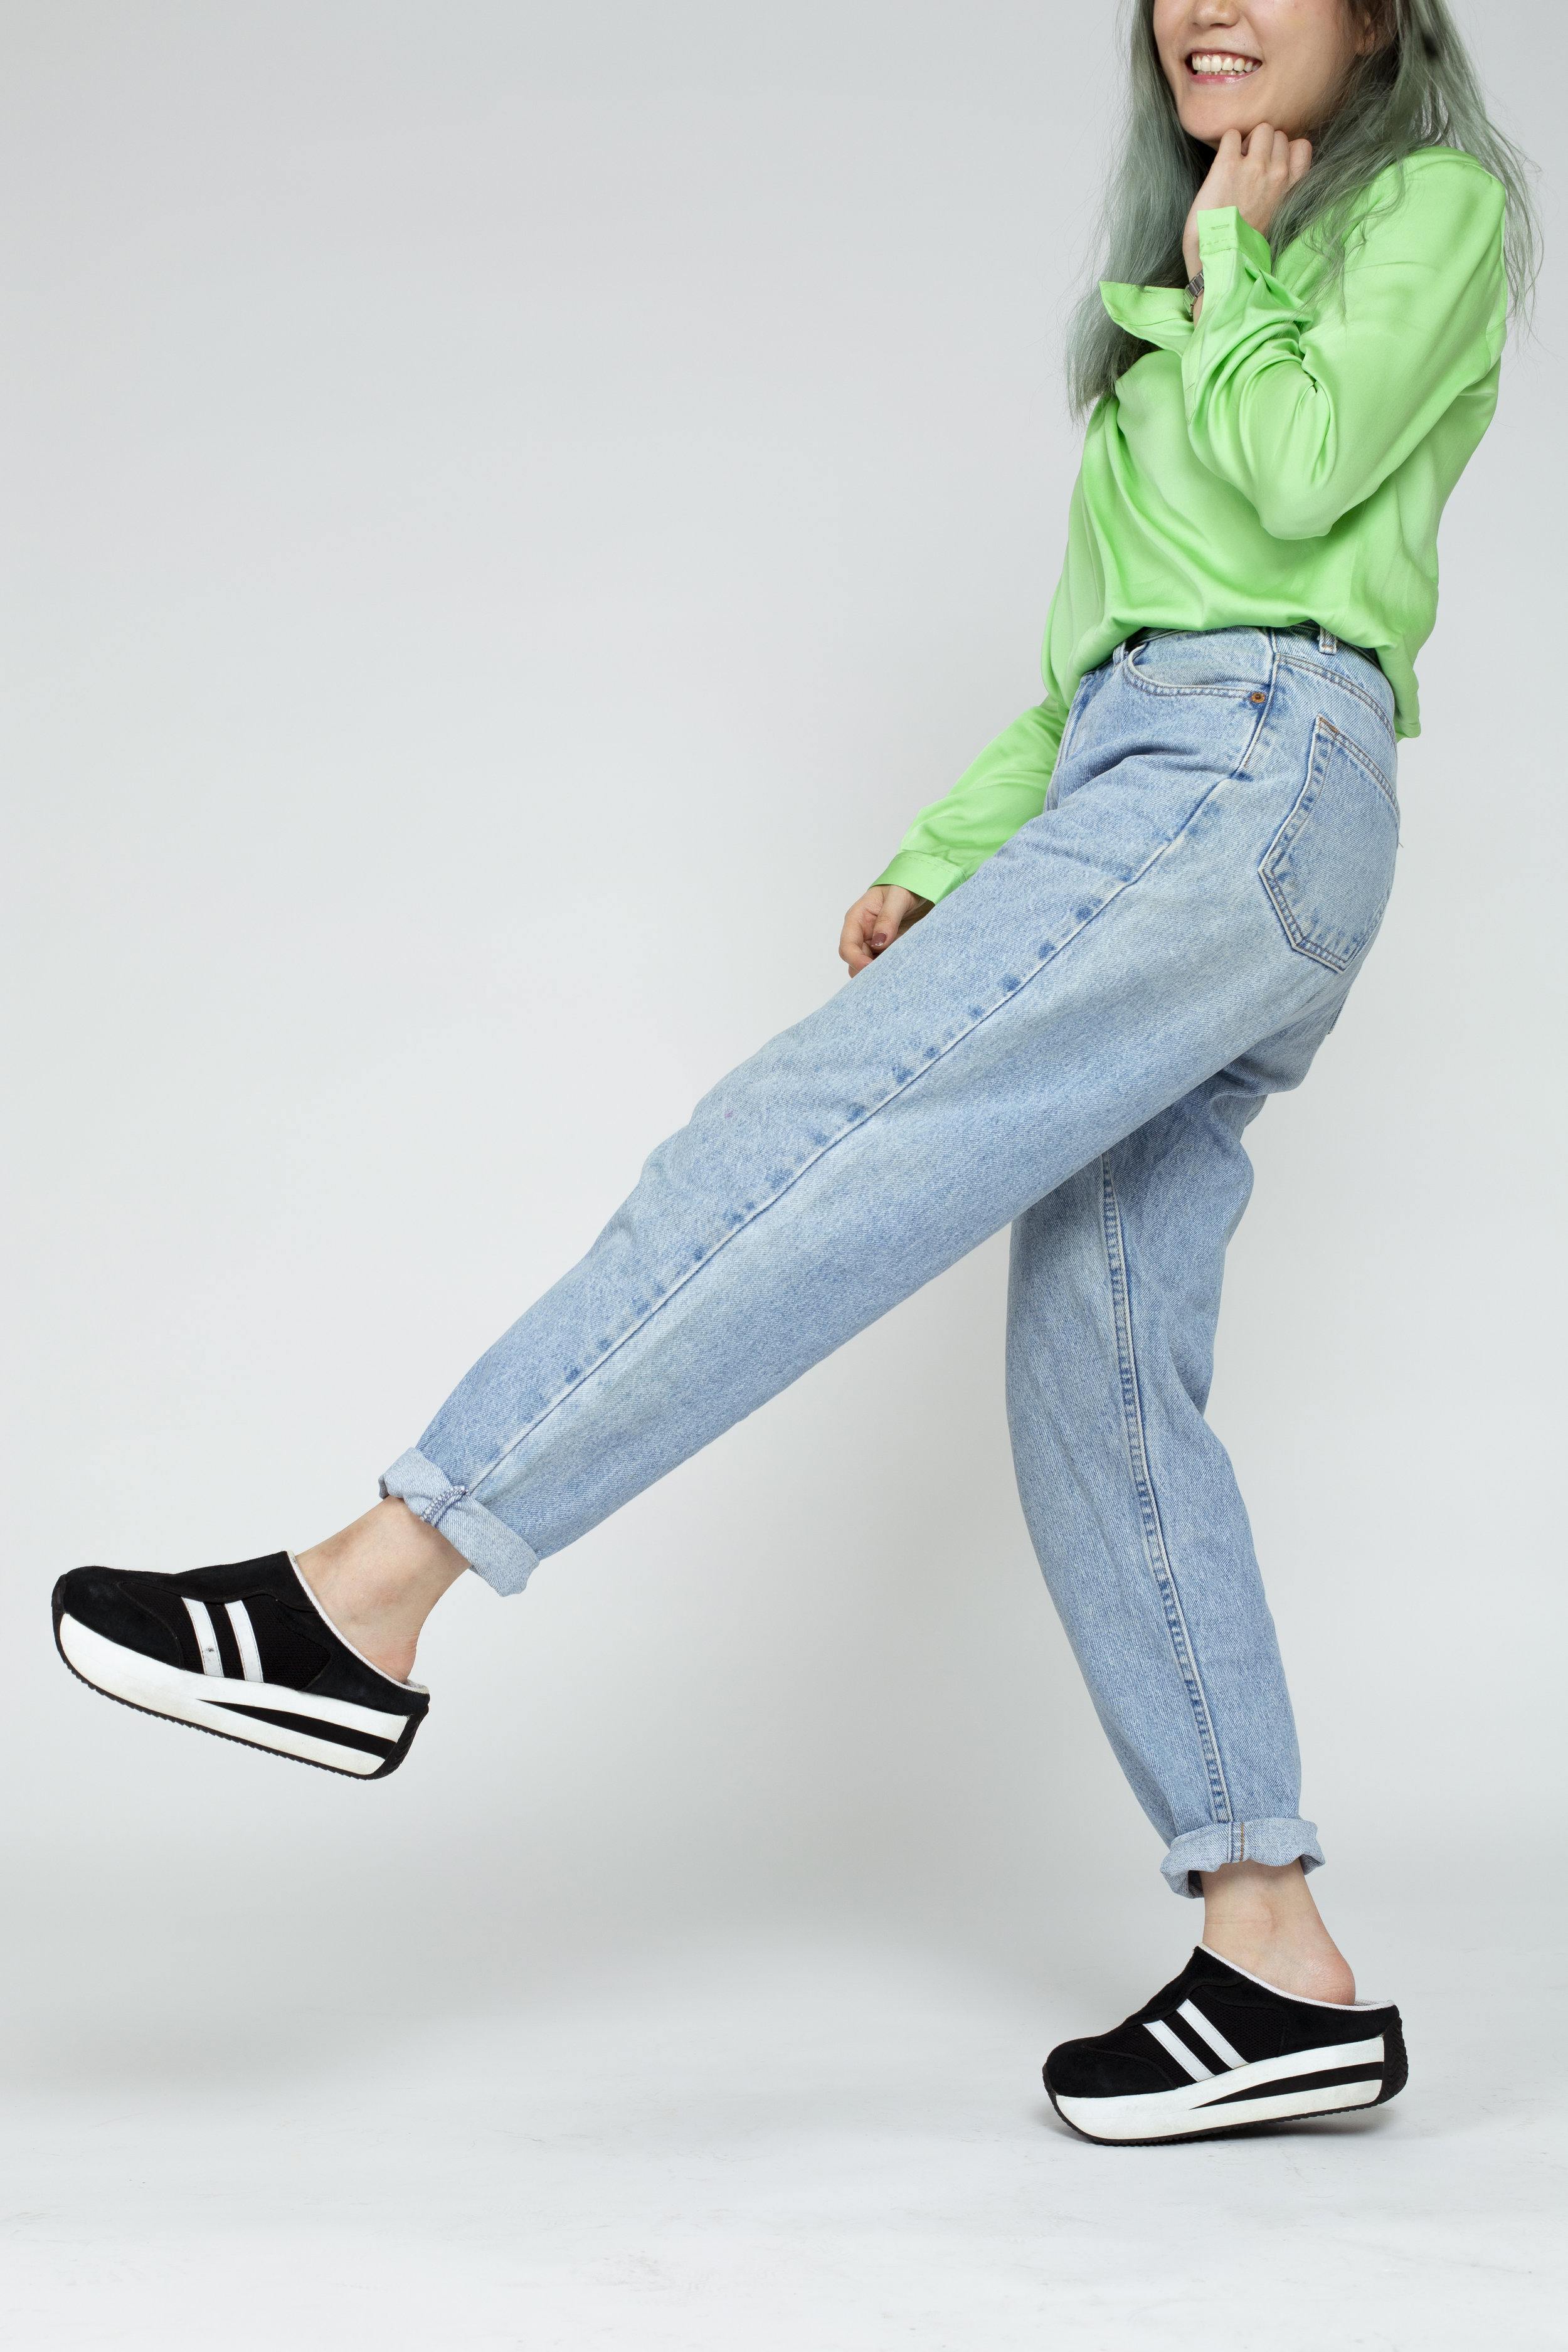 vintage mom jeans outfit